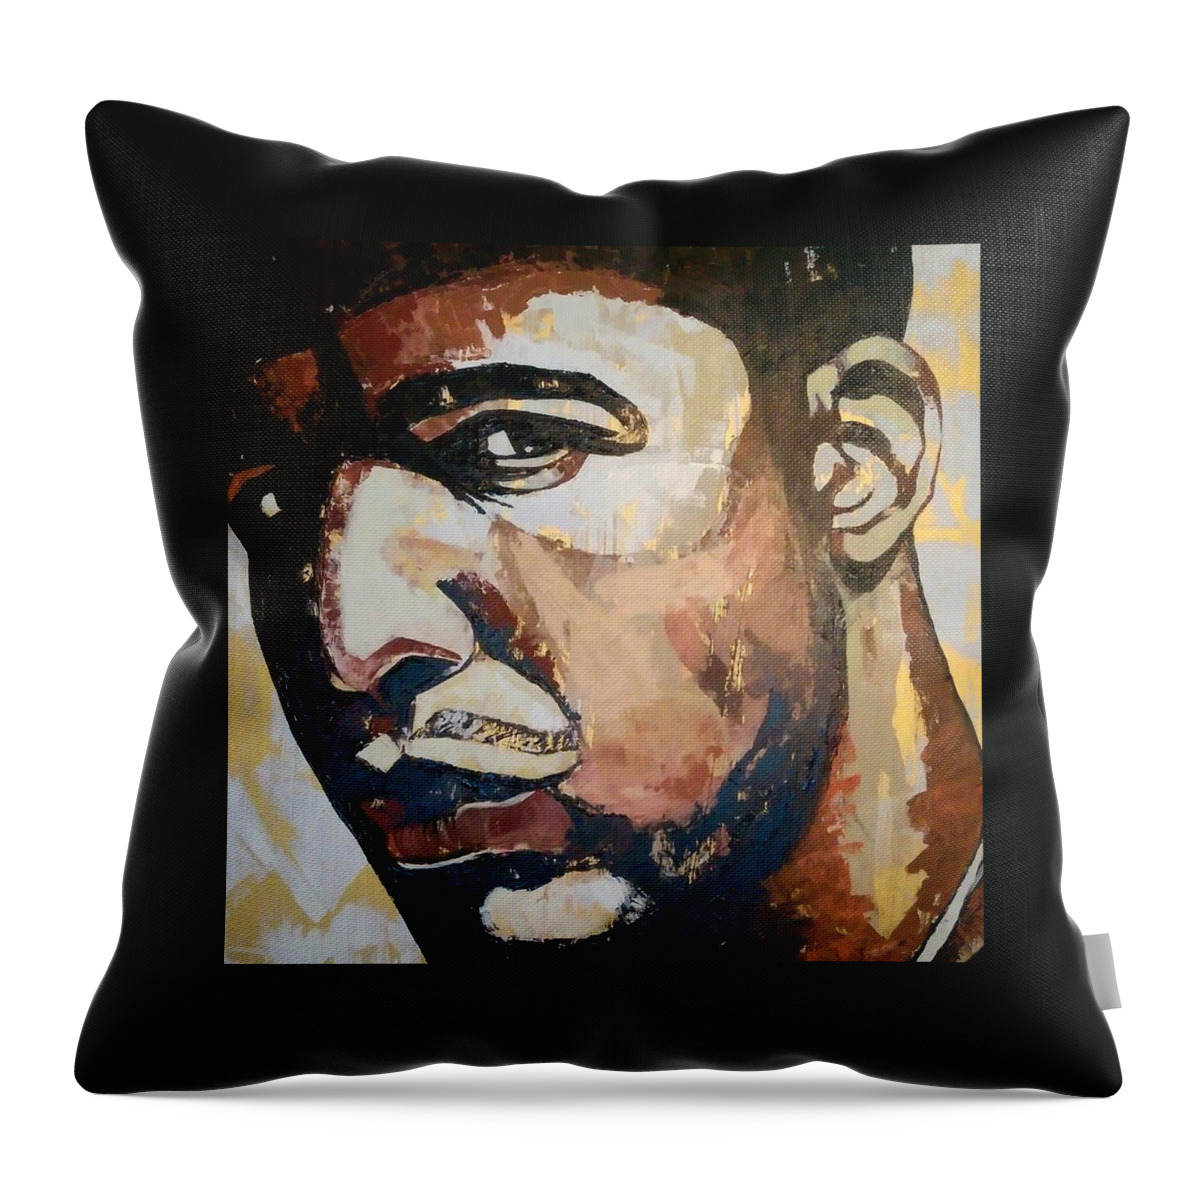 Abstract Realism Of Drake Whose Favorite Color Happens T Be Brown So That Determined The Palette. Throw Pillow featuring the painting Drake by Femme Blaicasso